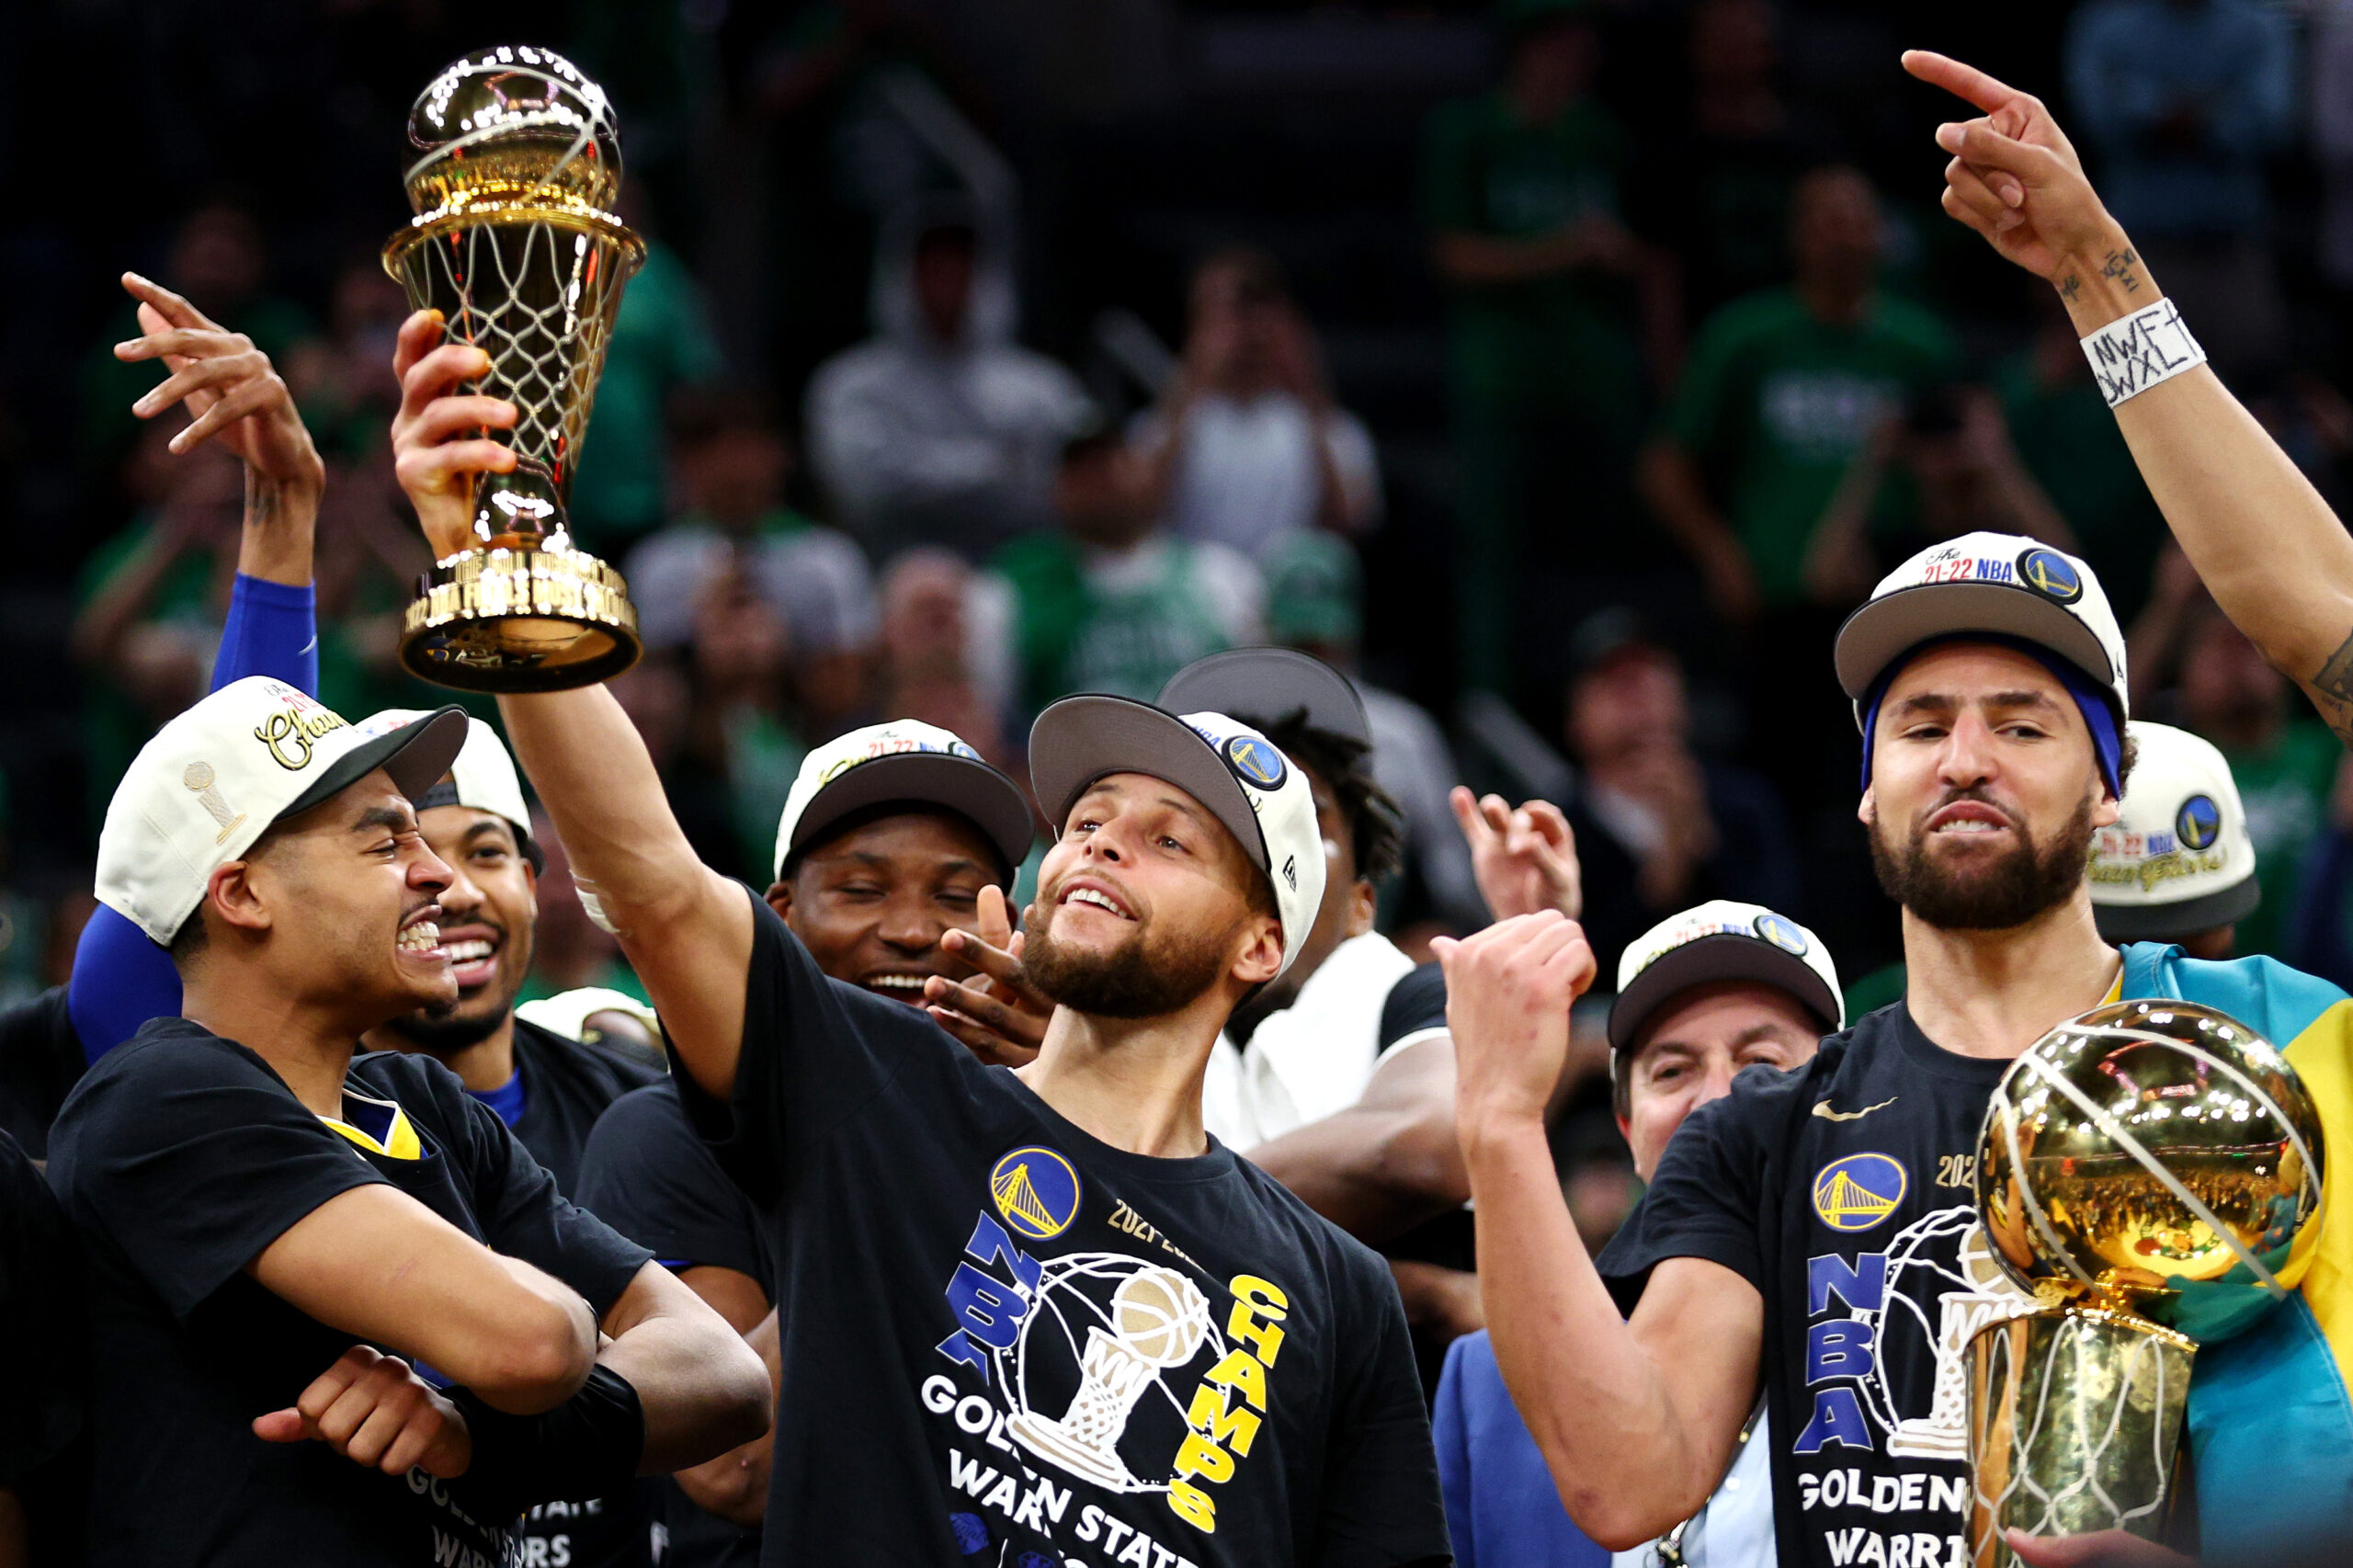 Steph Curry Named MVP as Warriors Win 4th NBA Championship in 8 Years, 103-90